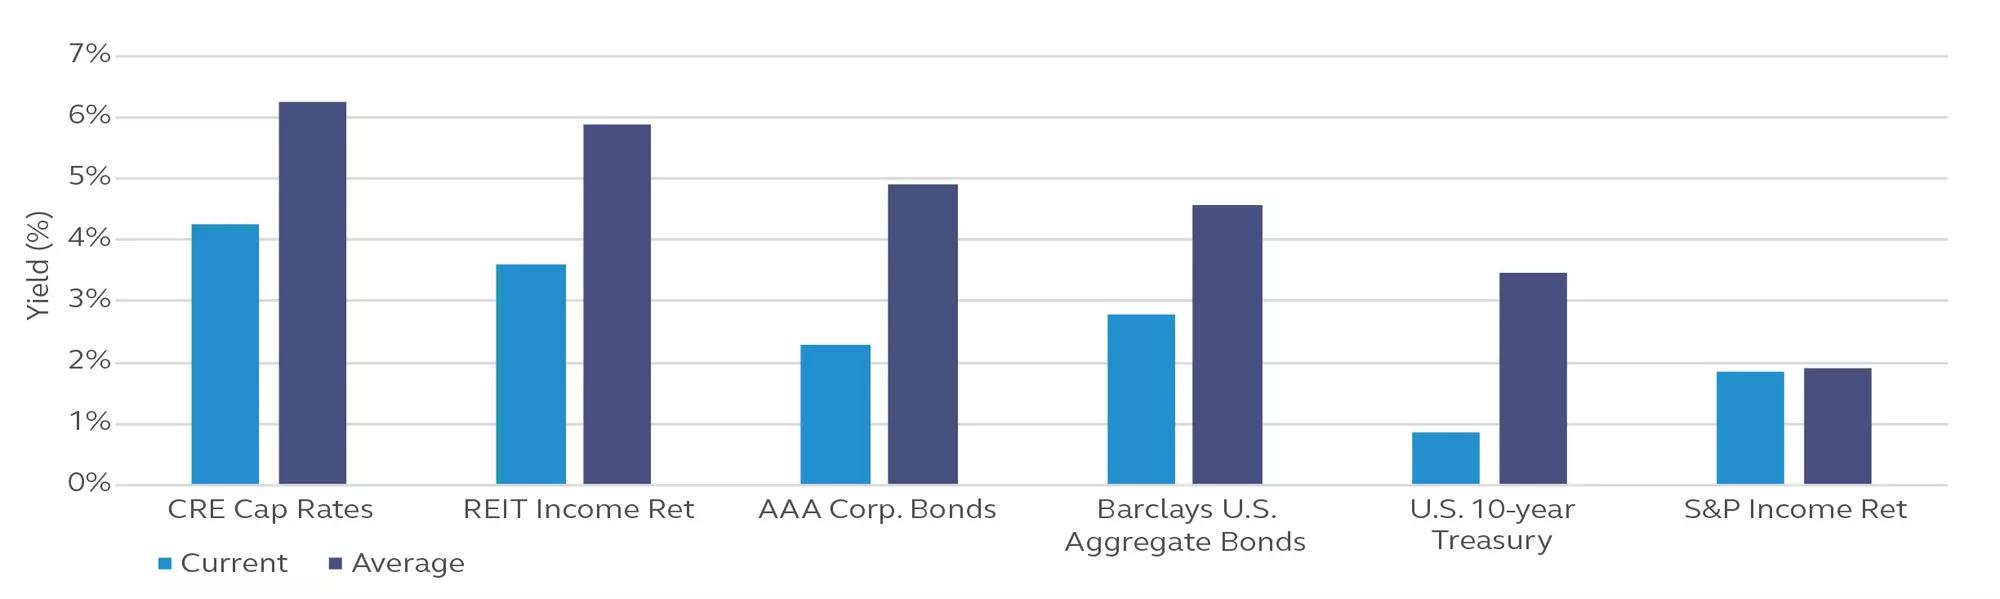 Bar graph showing real estate yield in percentages by asset class